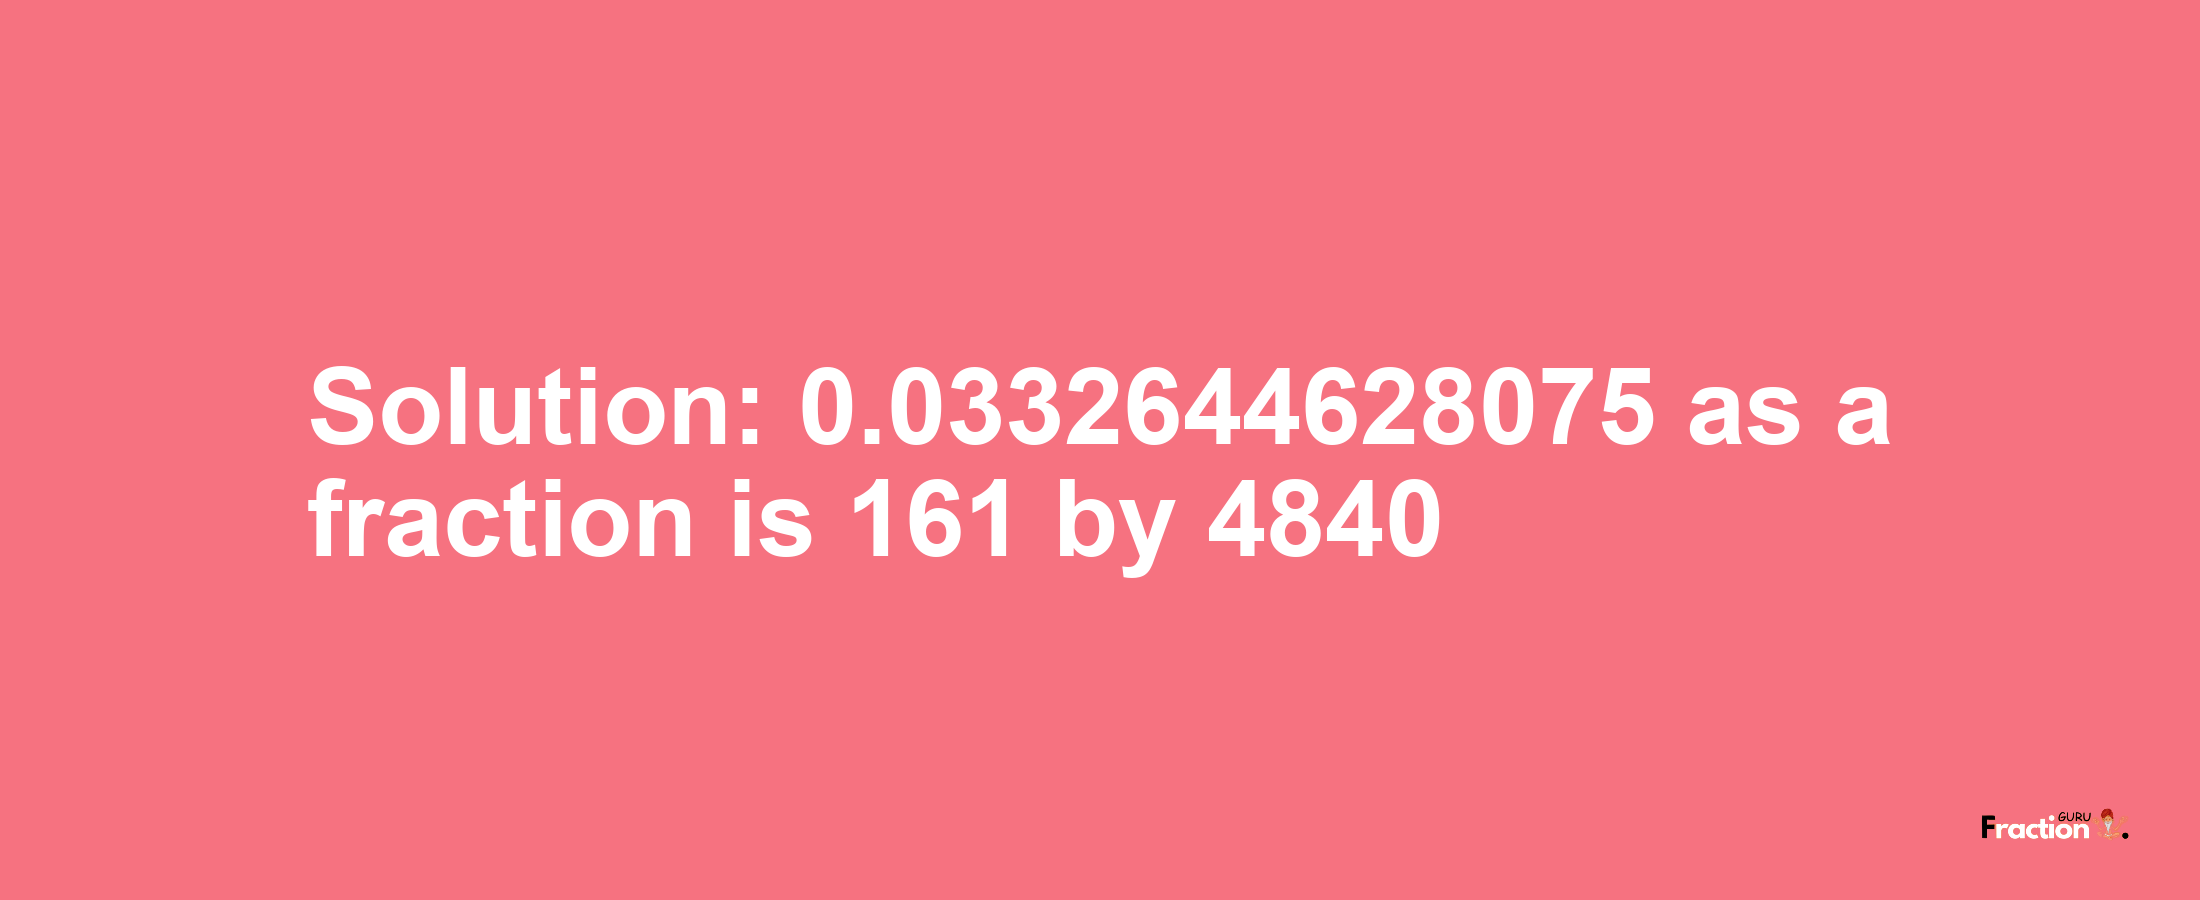 Solution:0.0332644628075 as a fraction is 161/4840